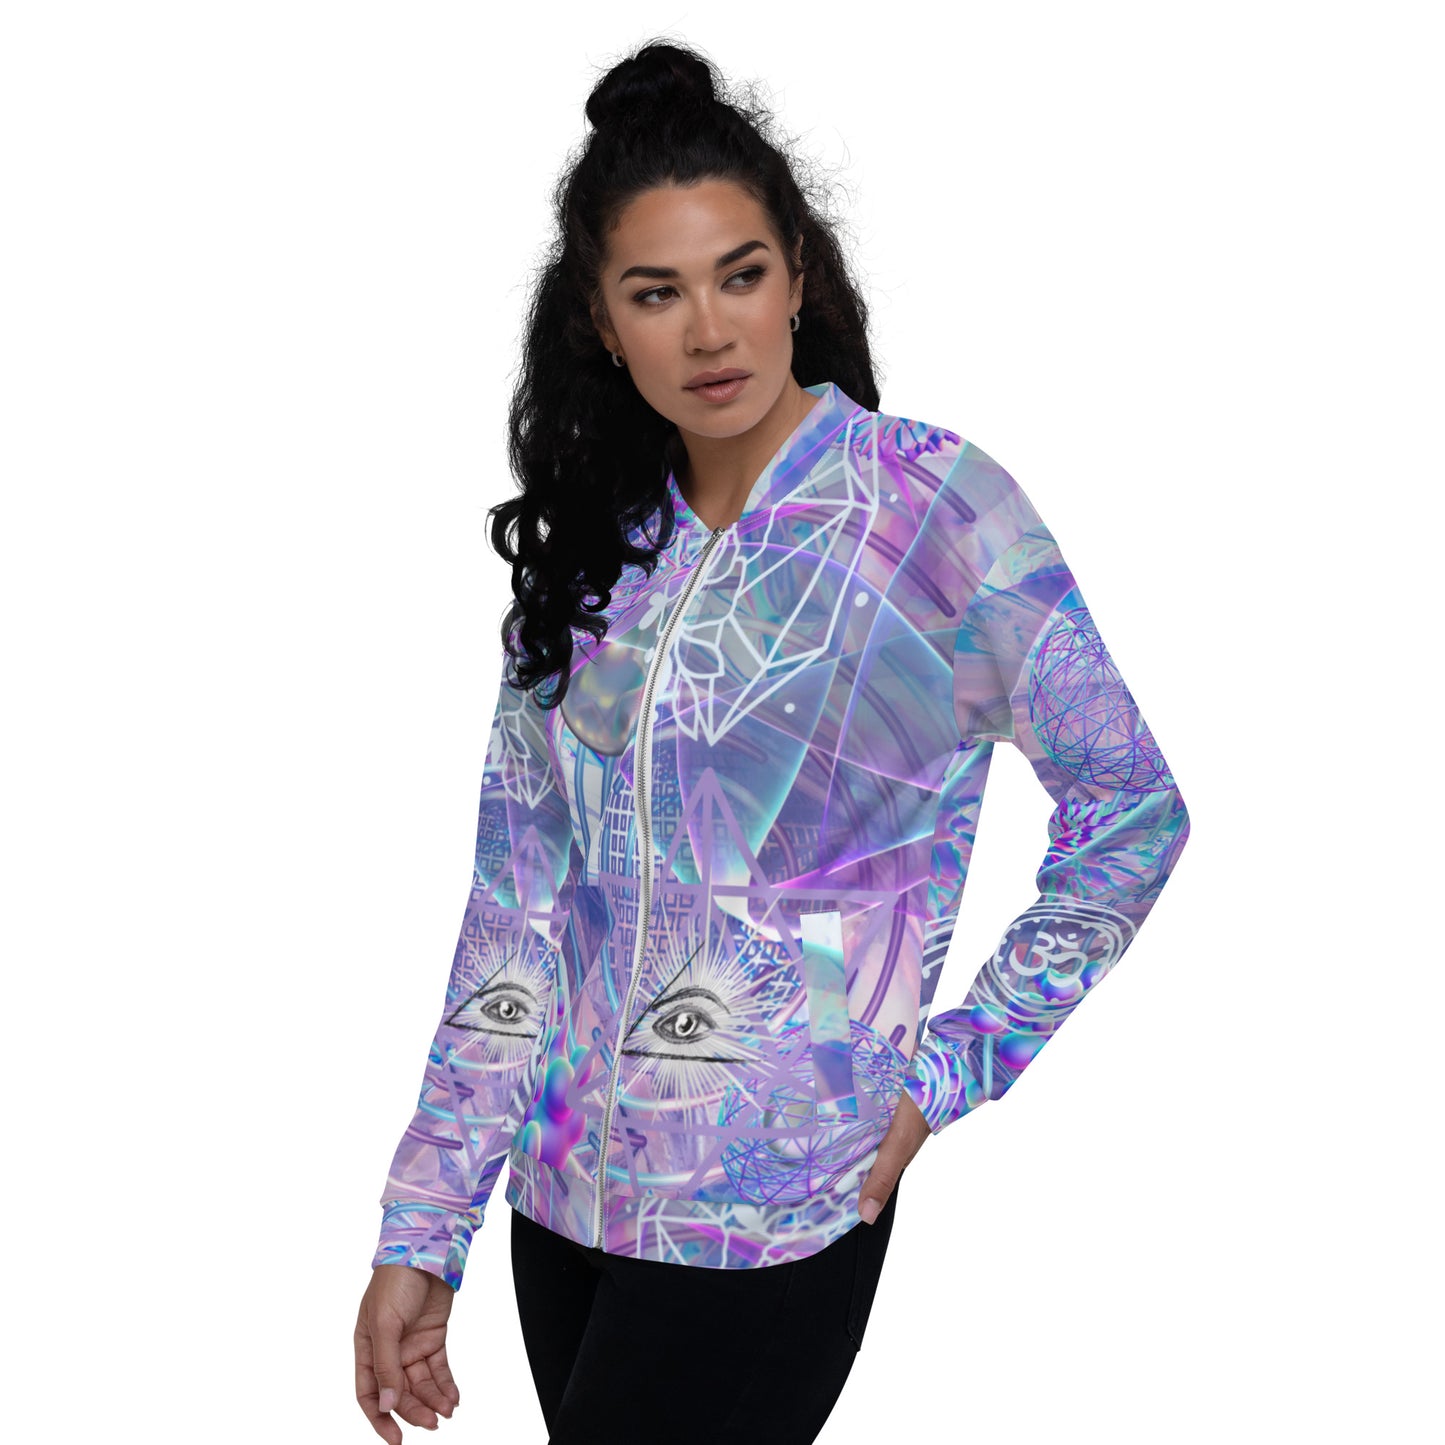 Periwinkle Dreams Abstract Print Psychedelic Festival Rave All Over Print UNISEX BOMBER JACKET